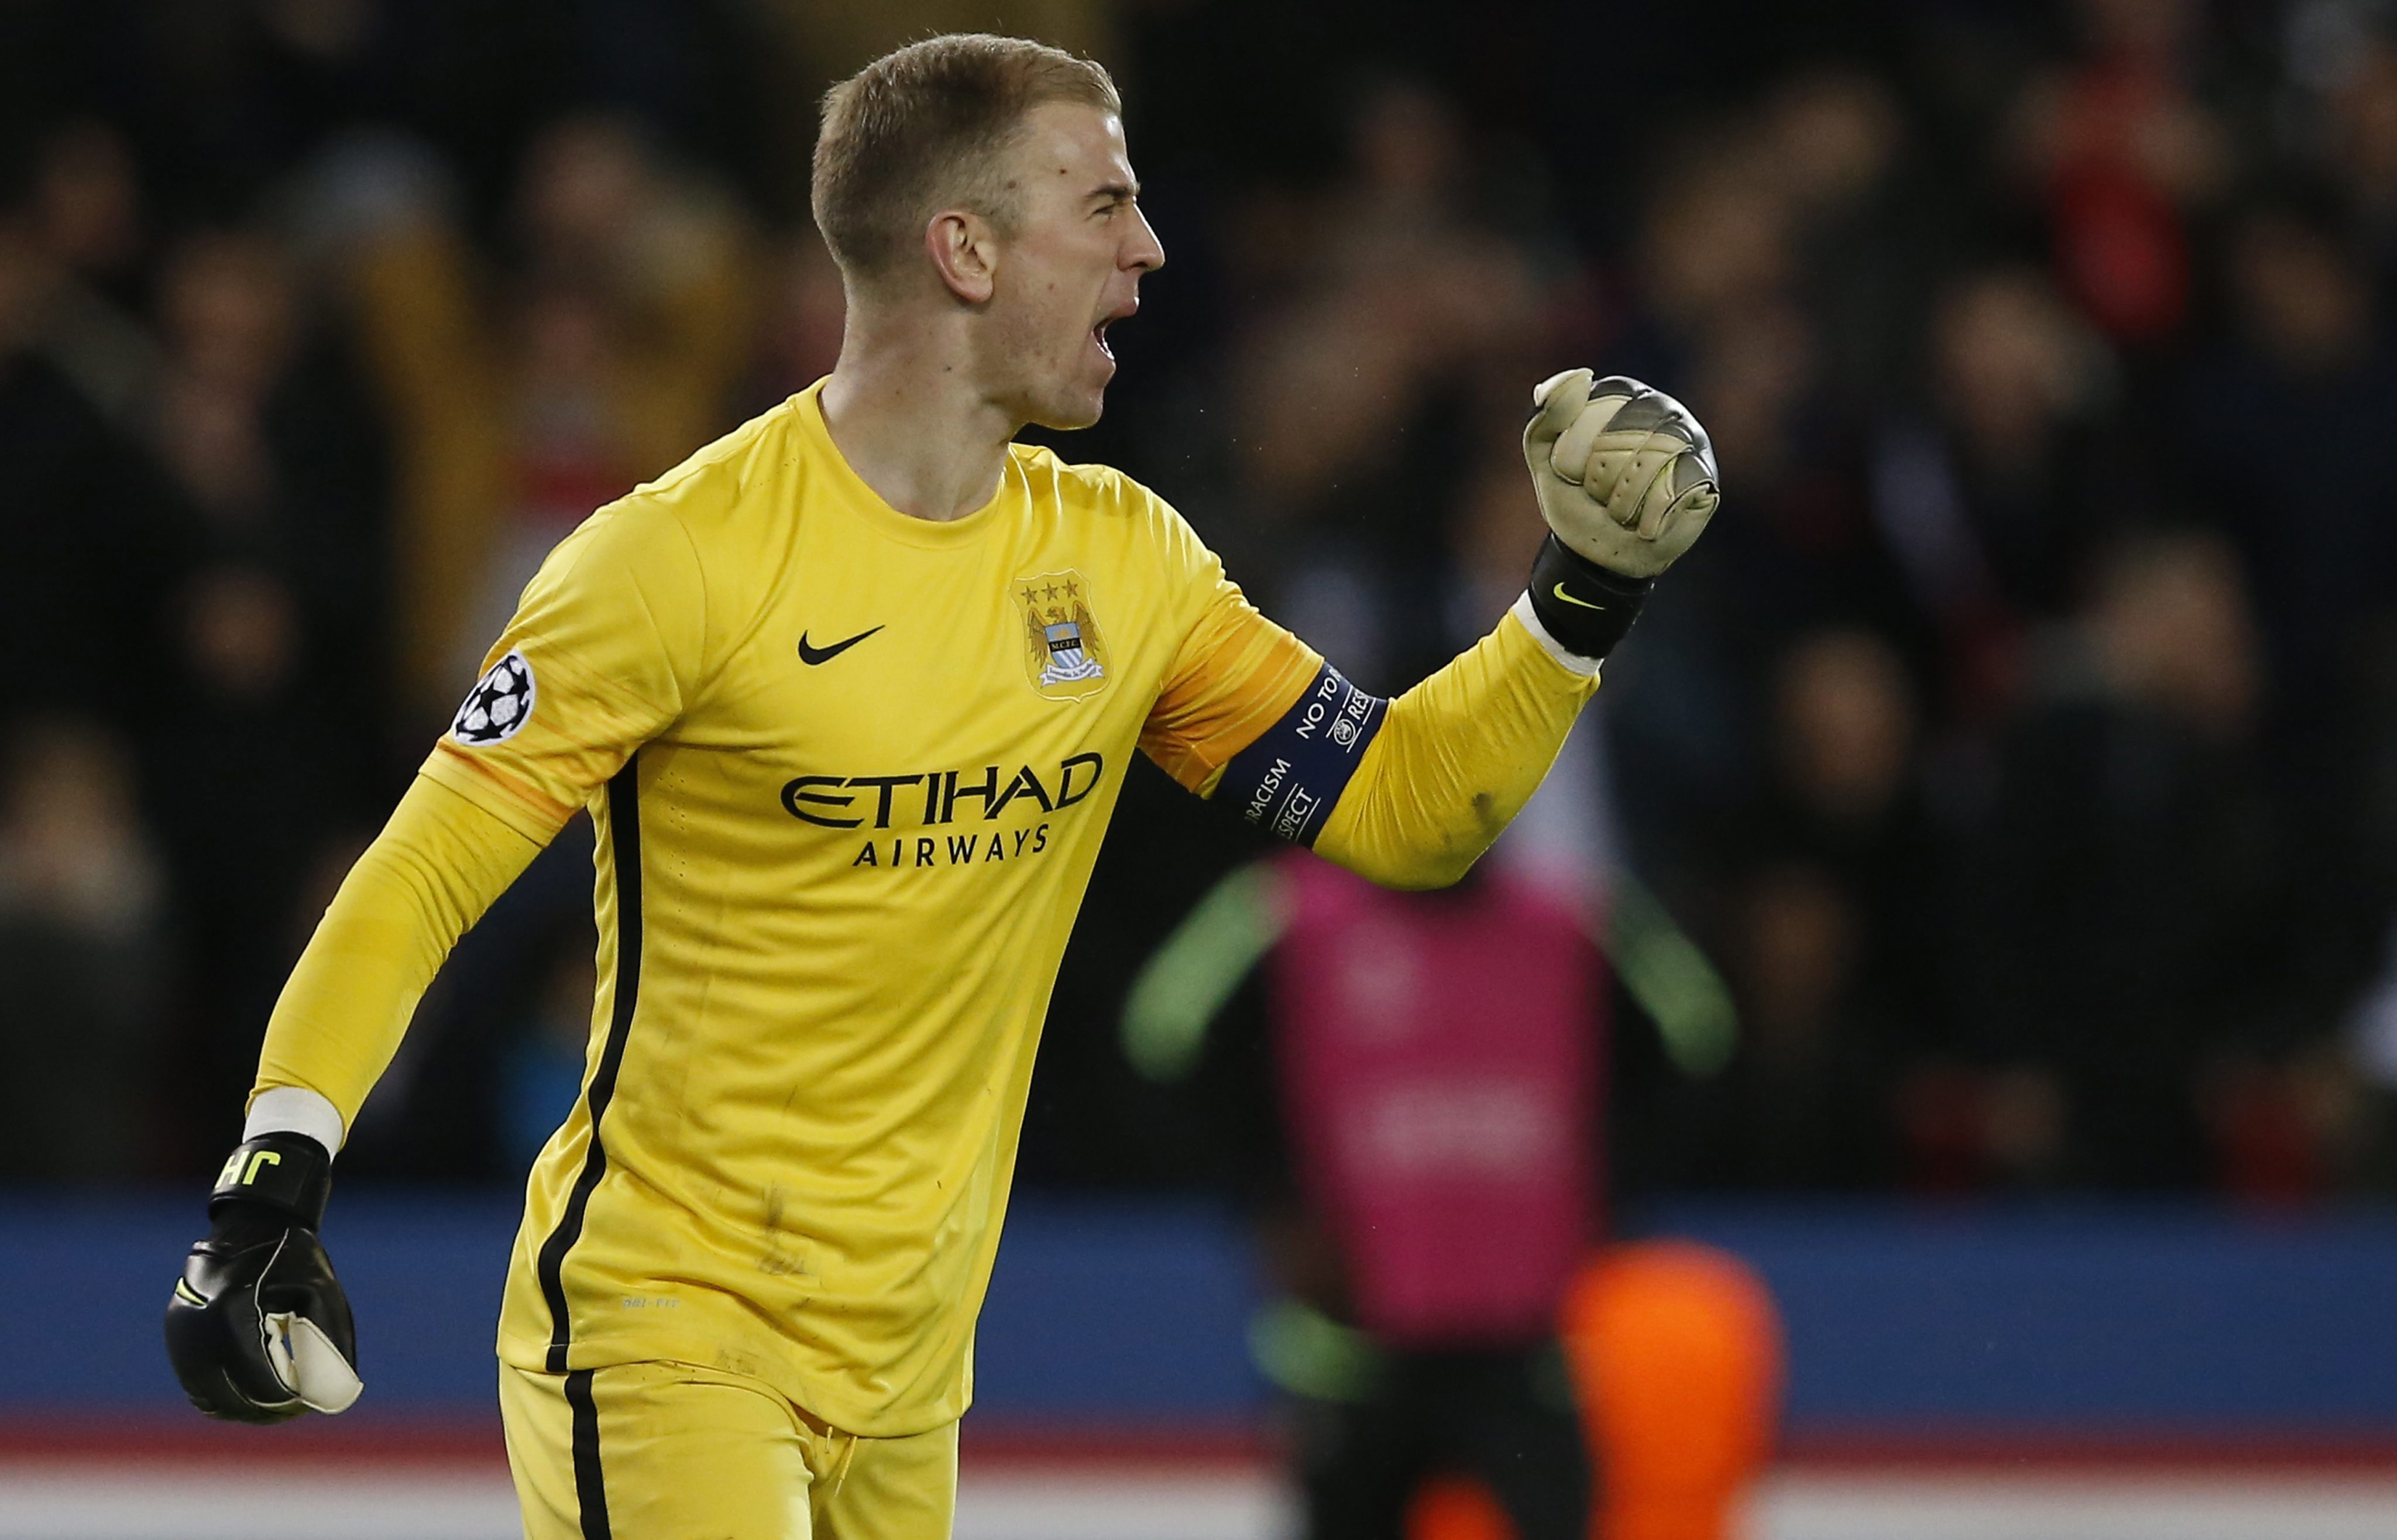 Joe Hart: one of the key members of the core in the early part of the decade.